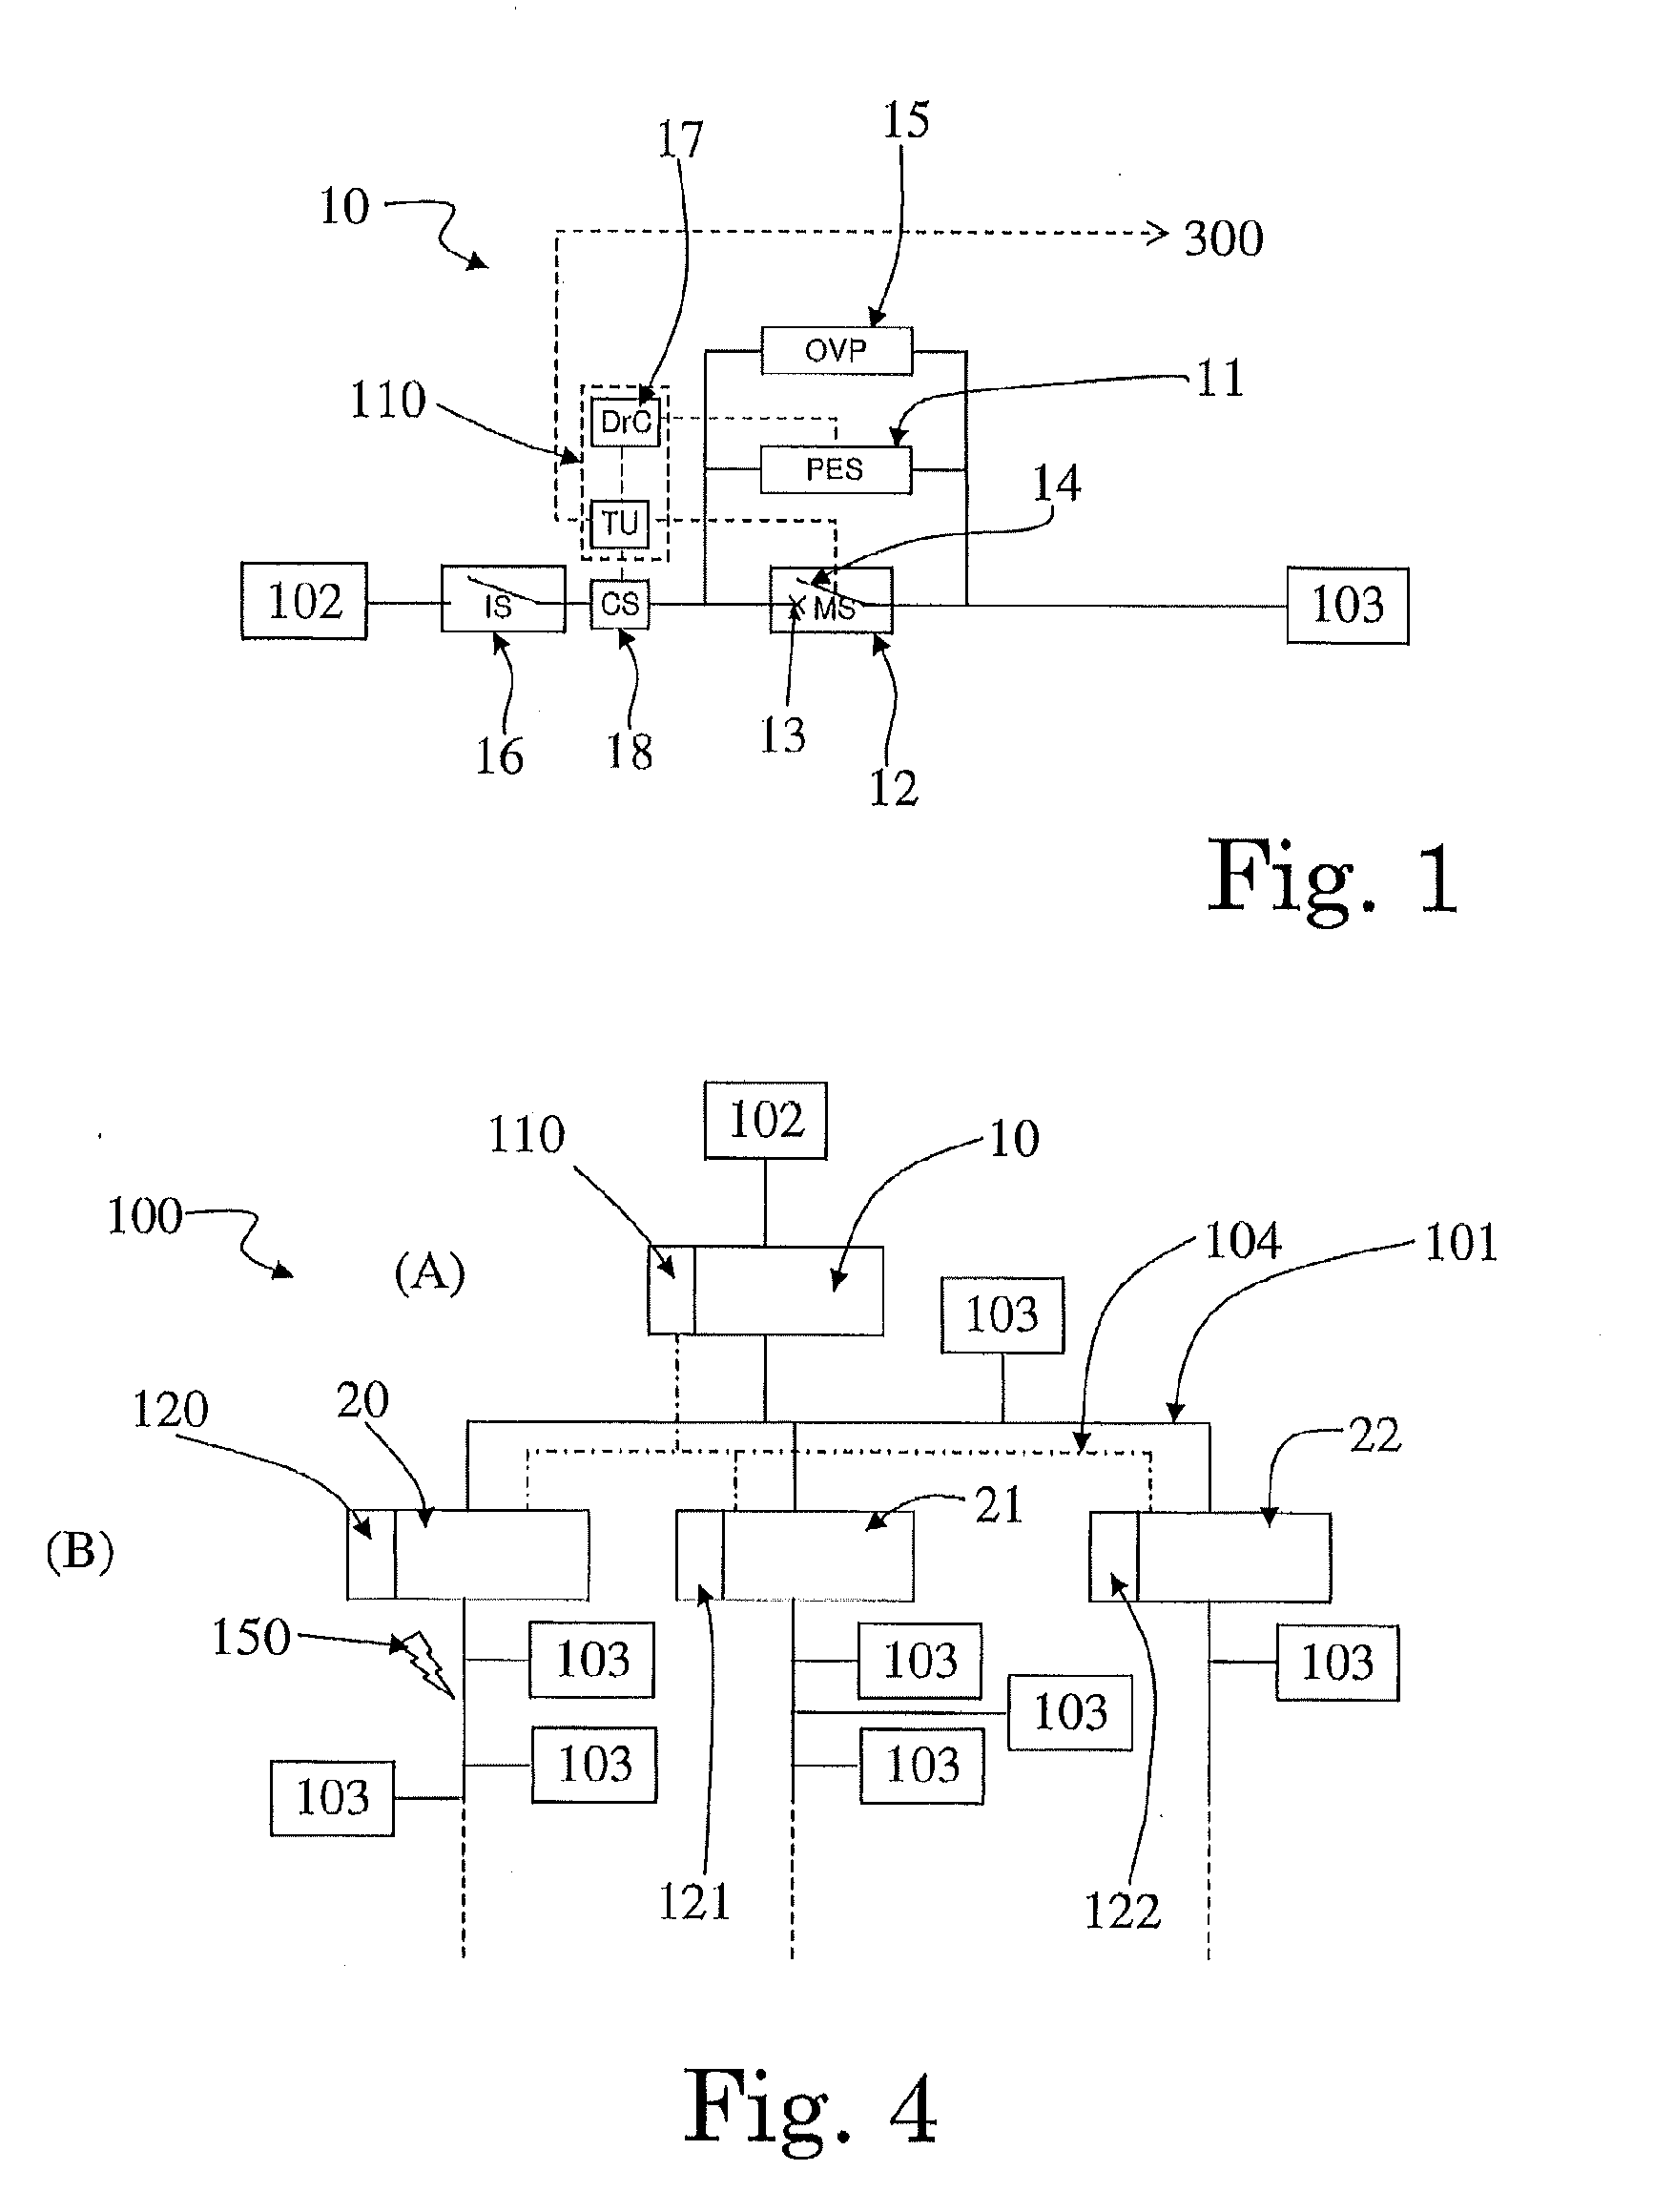 System and method for protecting an electrical grid against faults